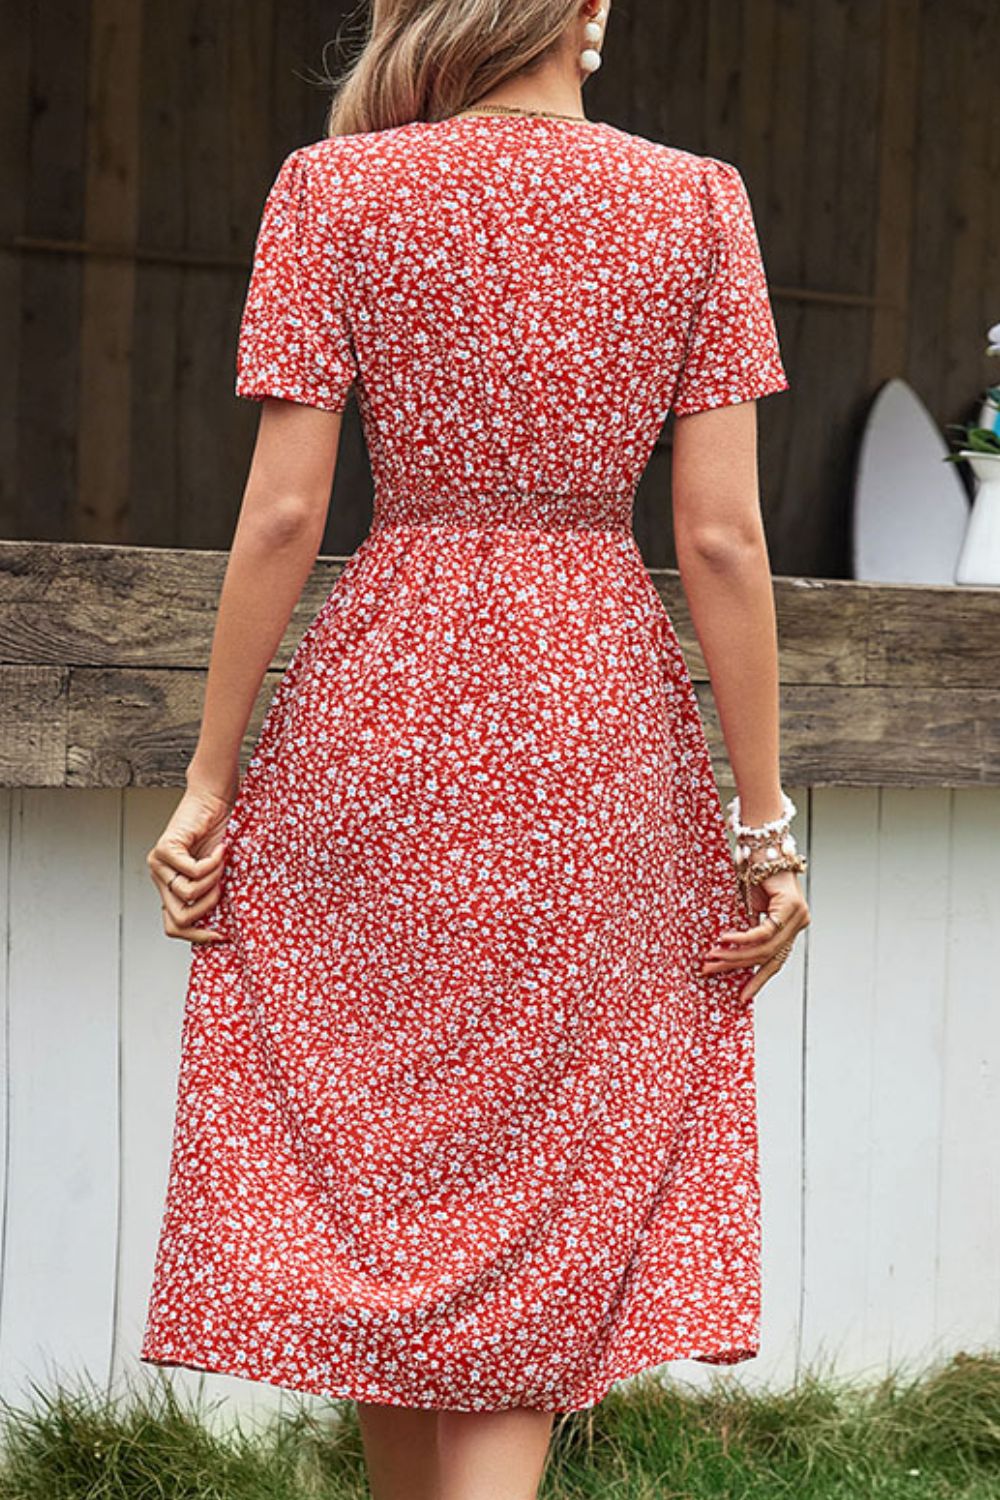 Summer Dream: Ditsy Floral Puff Sleeve Dress for Beach Weddings & Parties